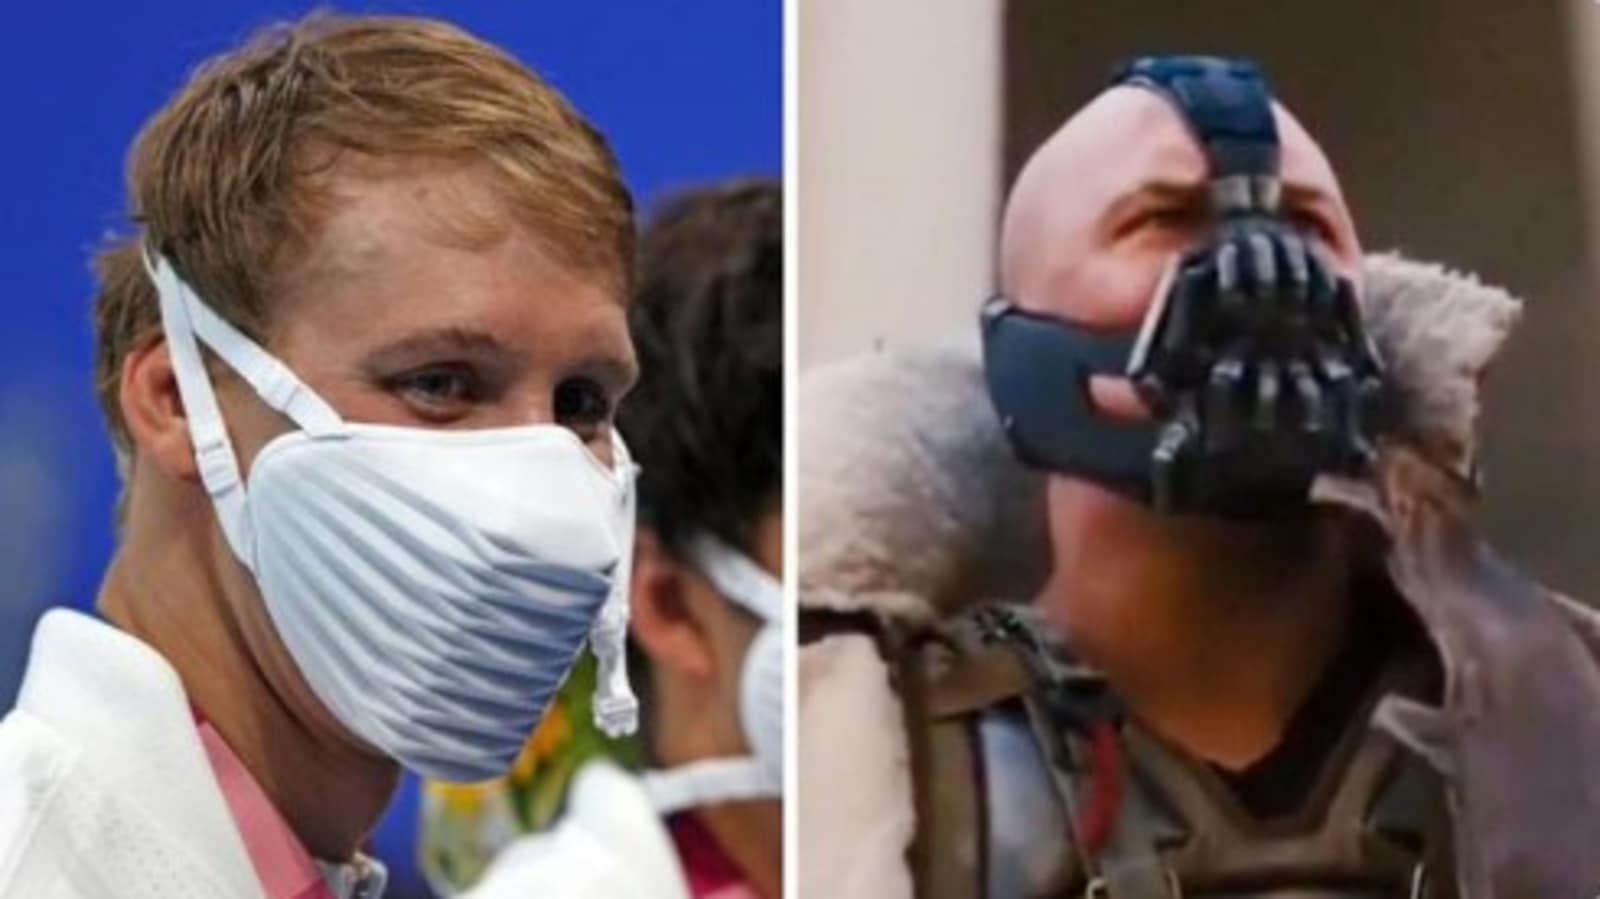 US swimming team's mask reminds people of Bane from Batman. Memes flood  Twitter | Trending - Hindustan Times